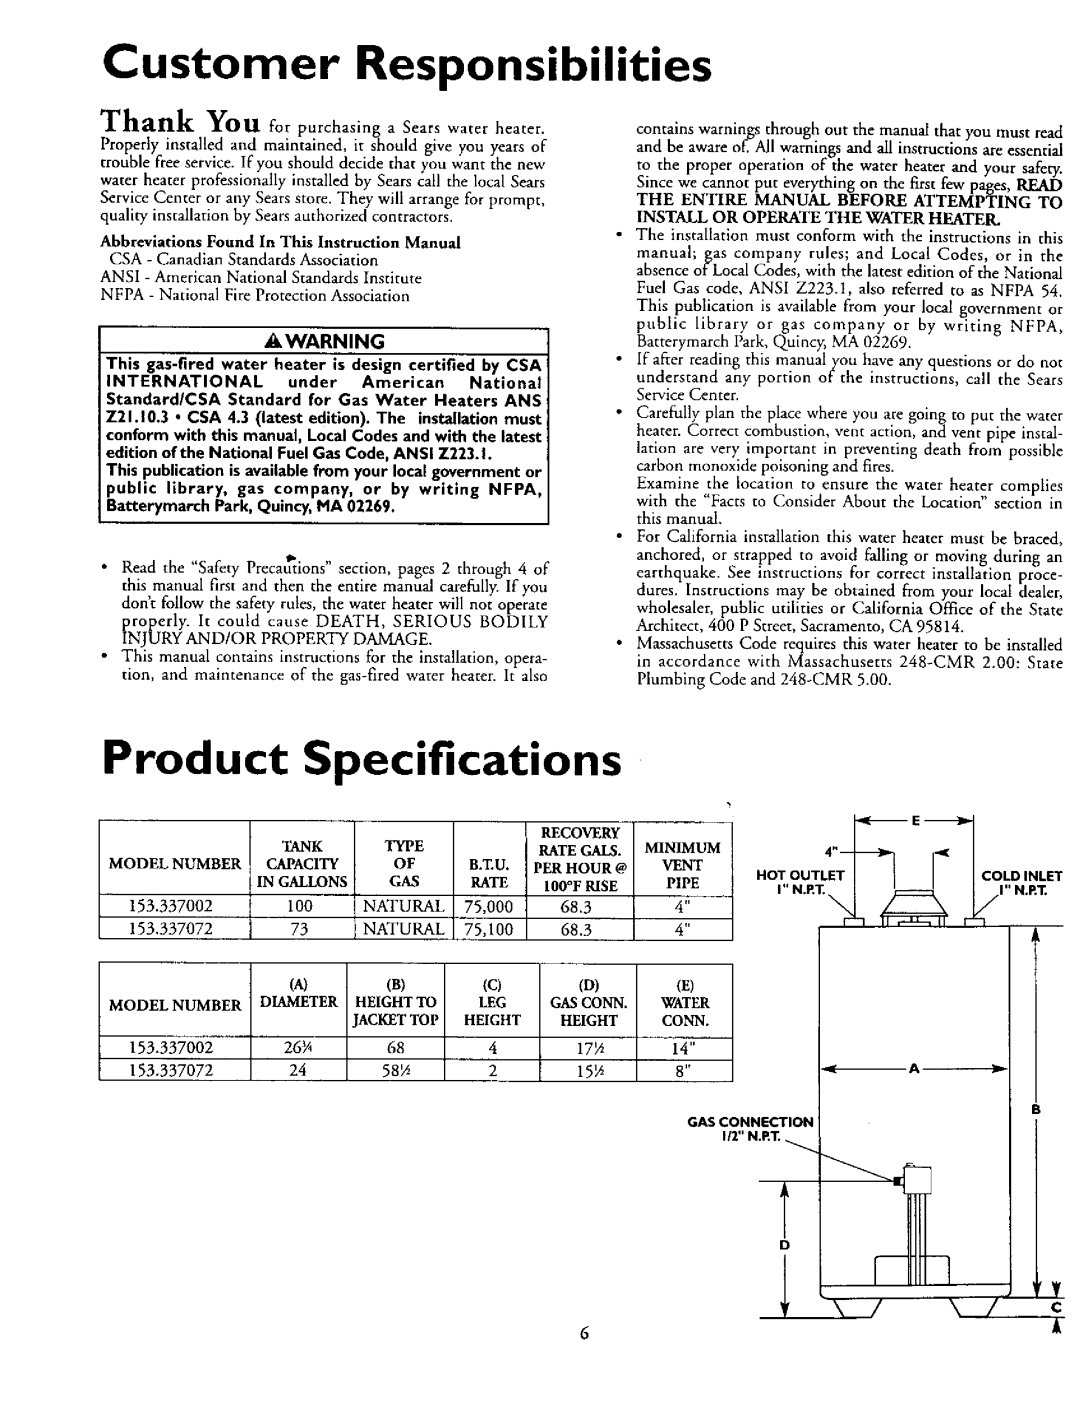 Kenmore 153.337072, 153.337002 owner manual Customer Responsibilities, Specifications, Product 